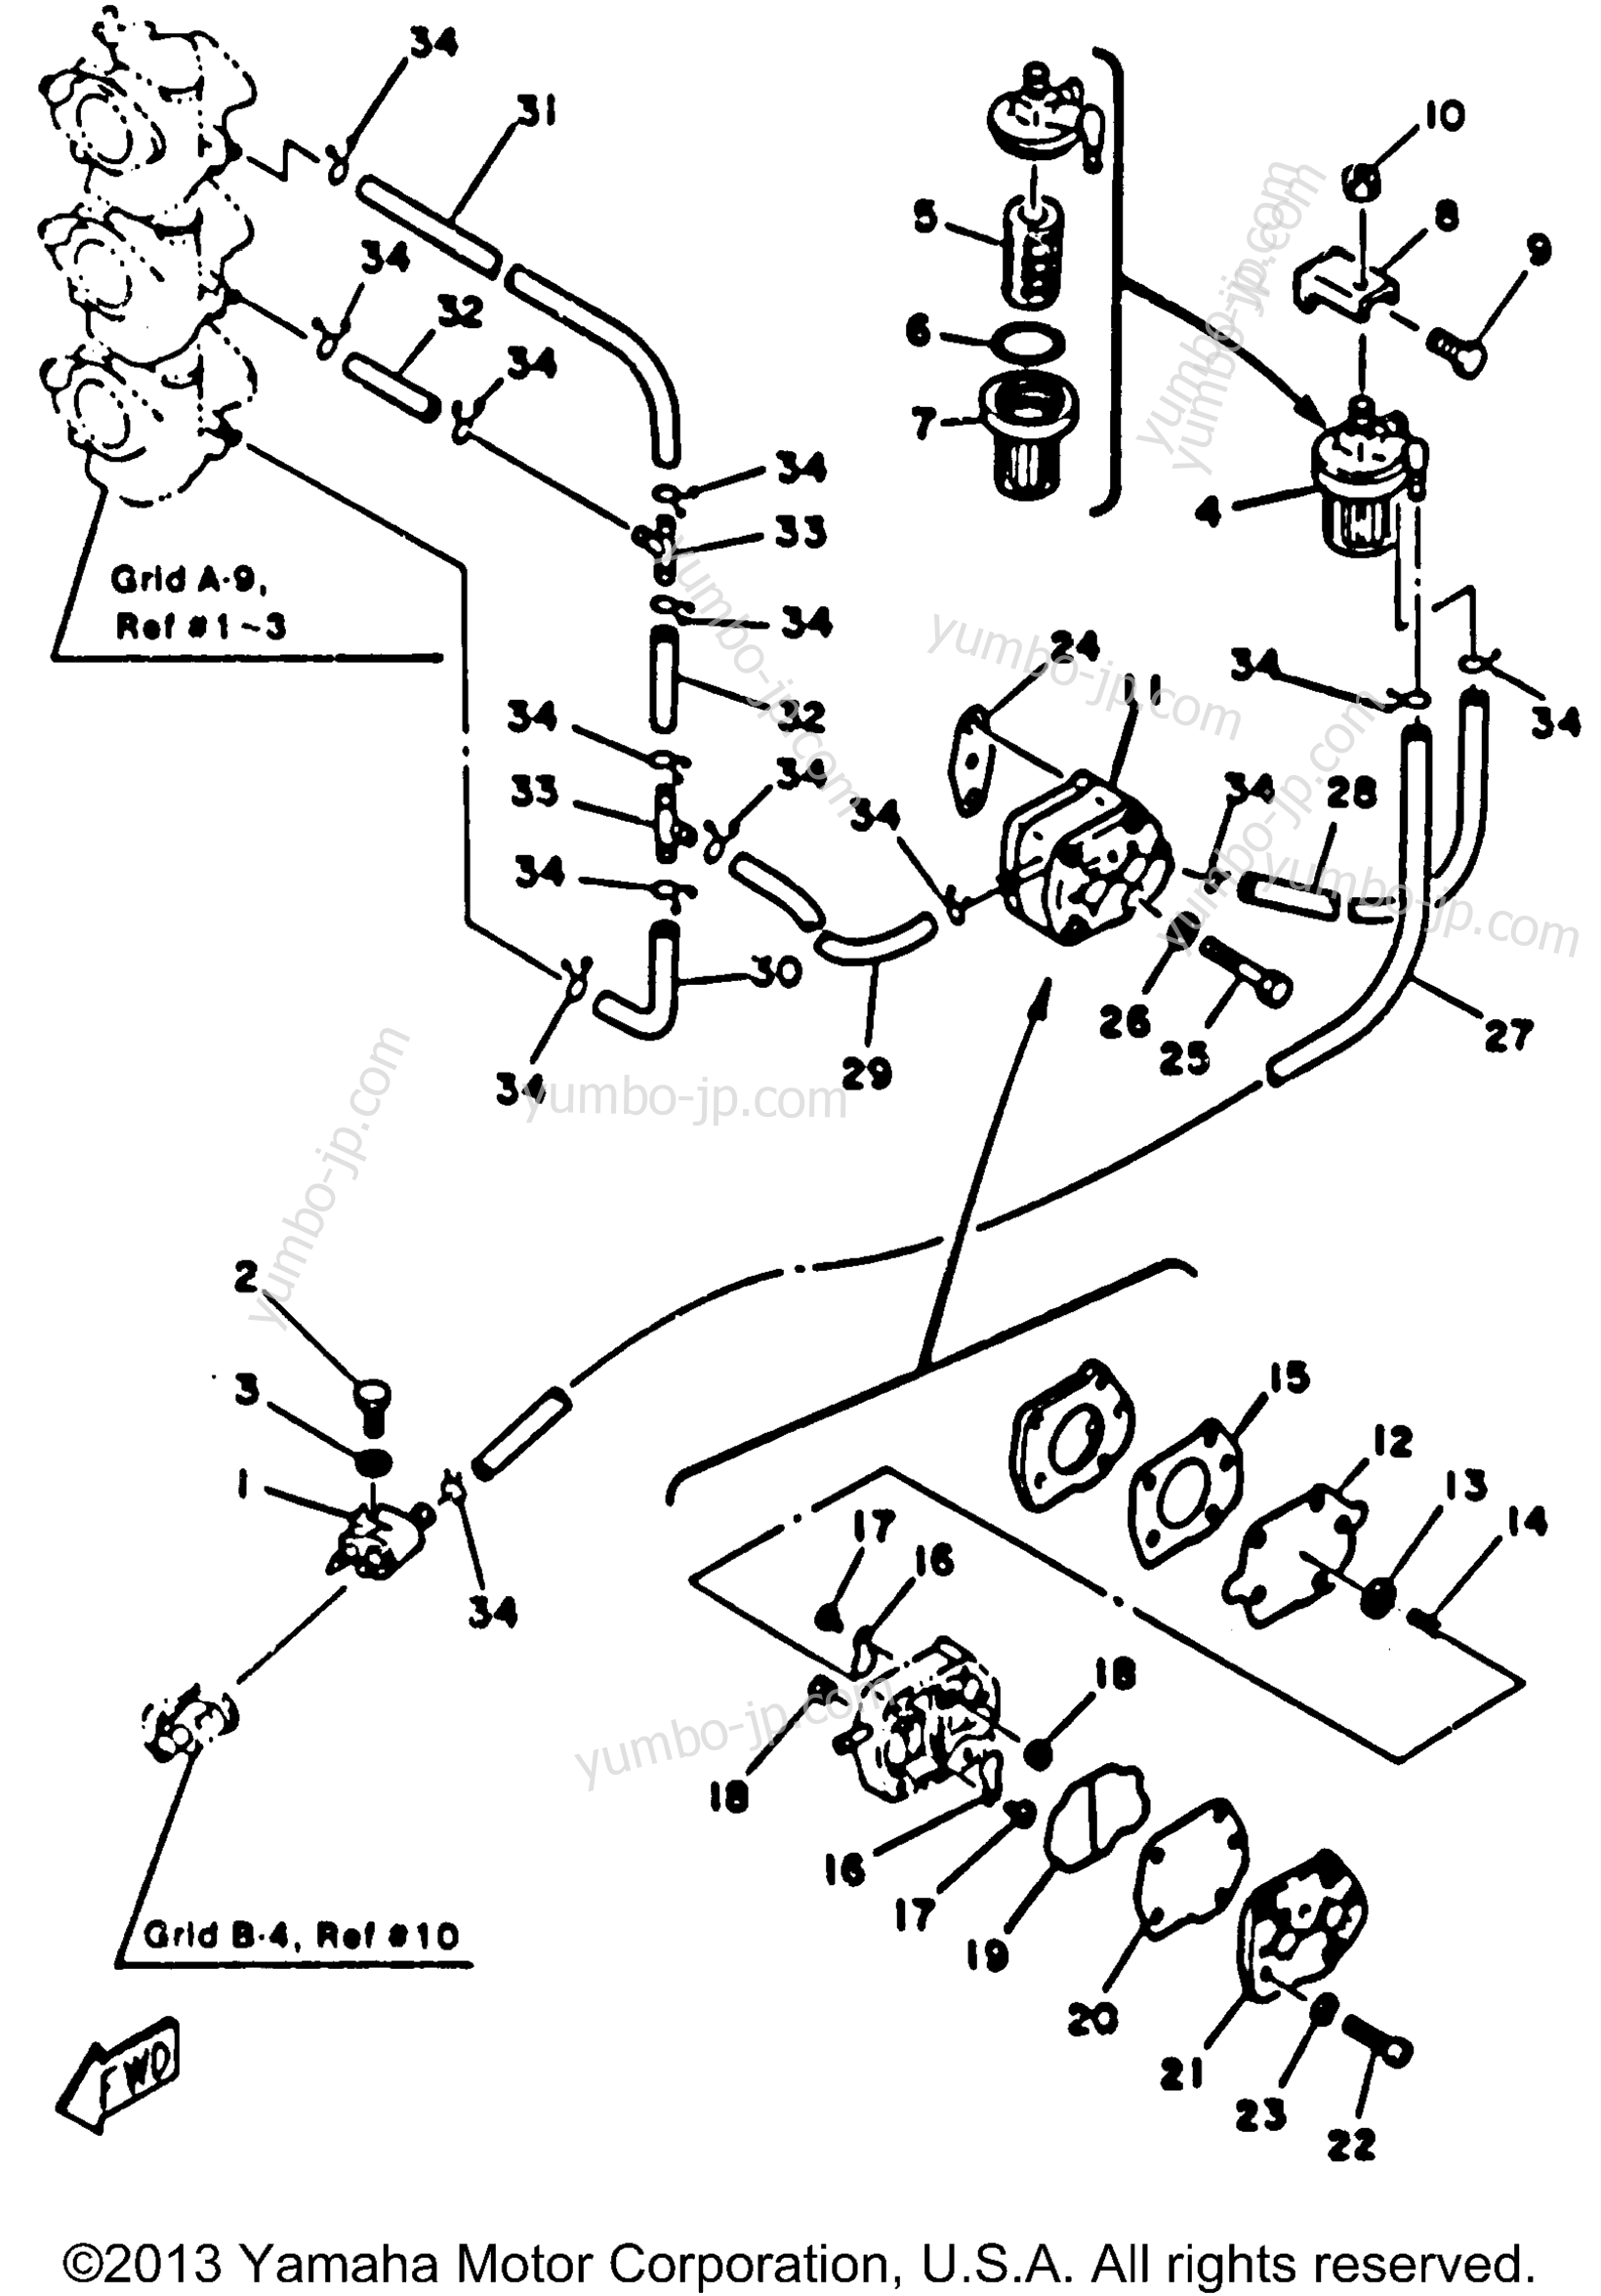 FUEL SYSTEM for outboards YAMAHA 70ETLK 1985 year